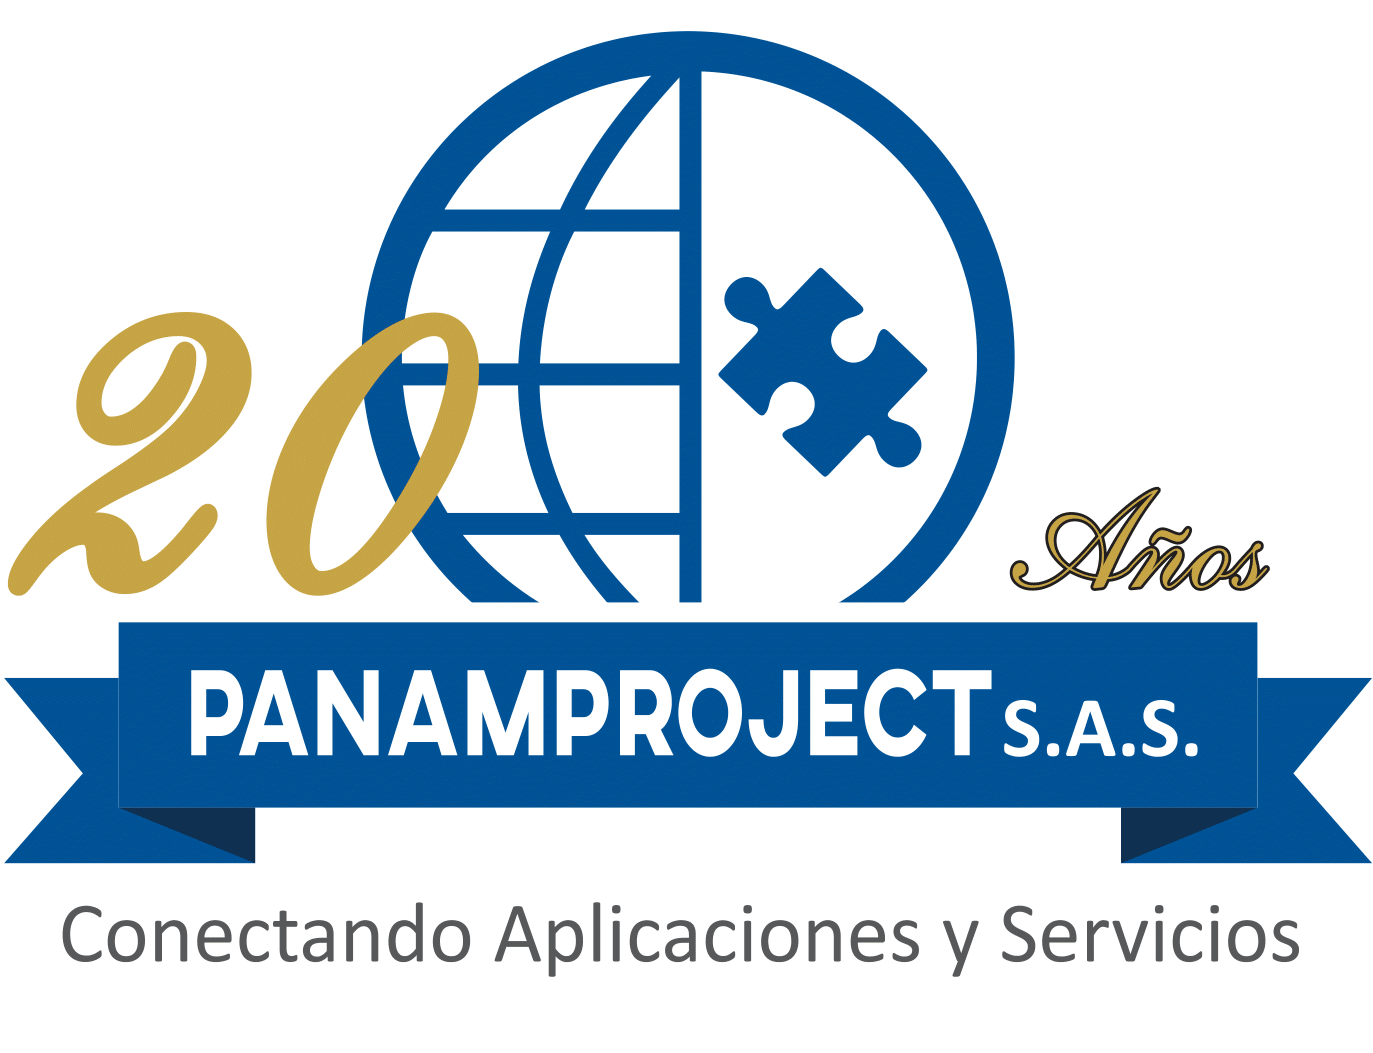 PANAMPROJECT S.A.S logo